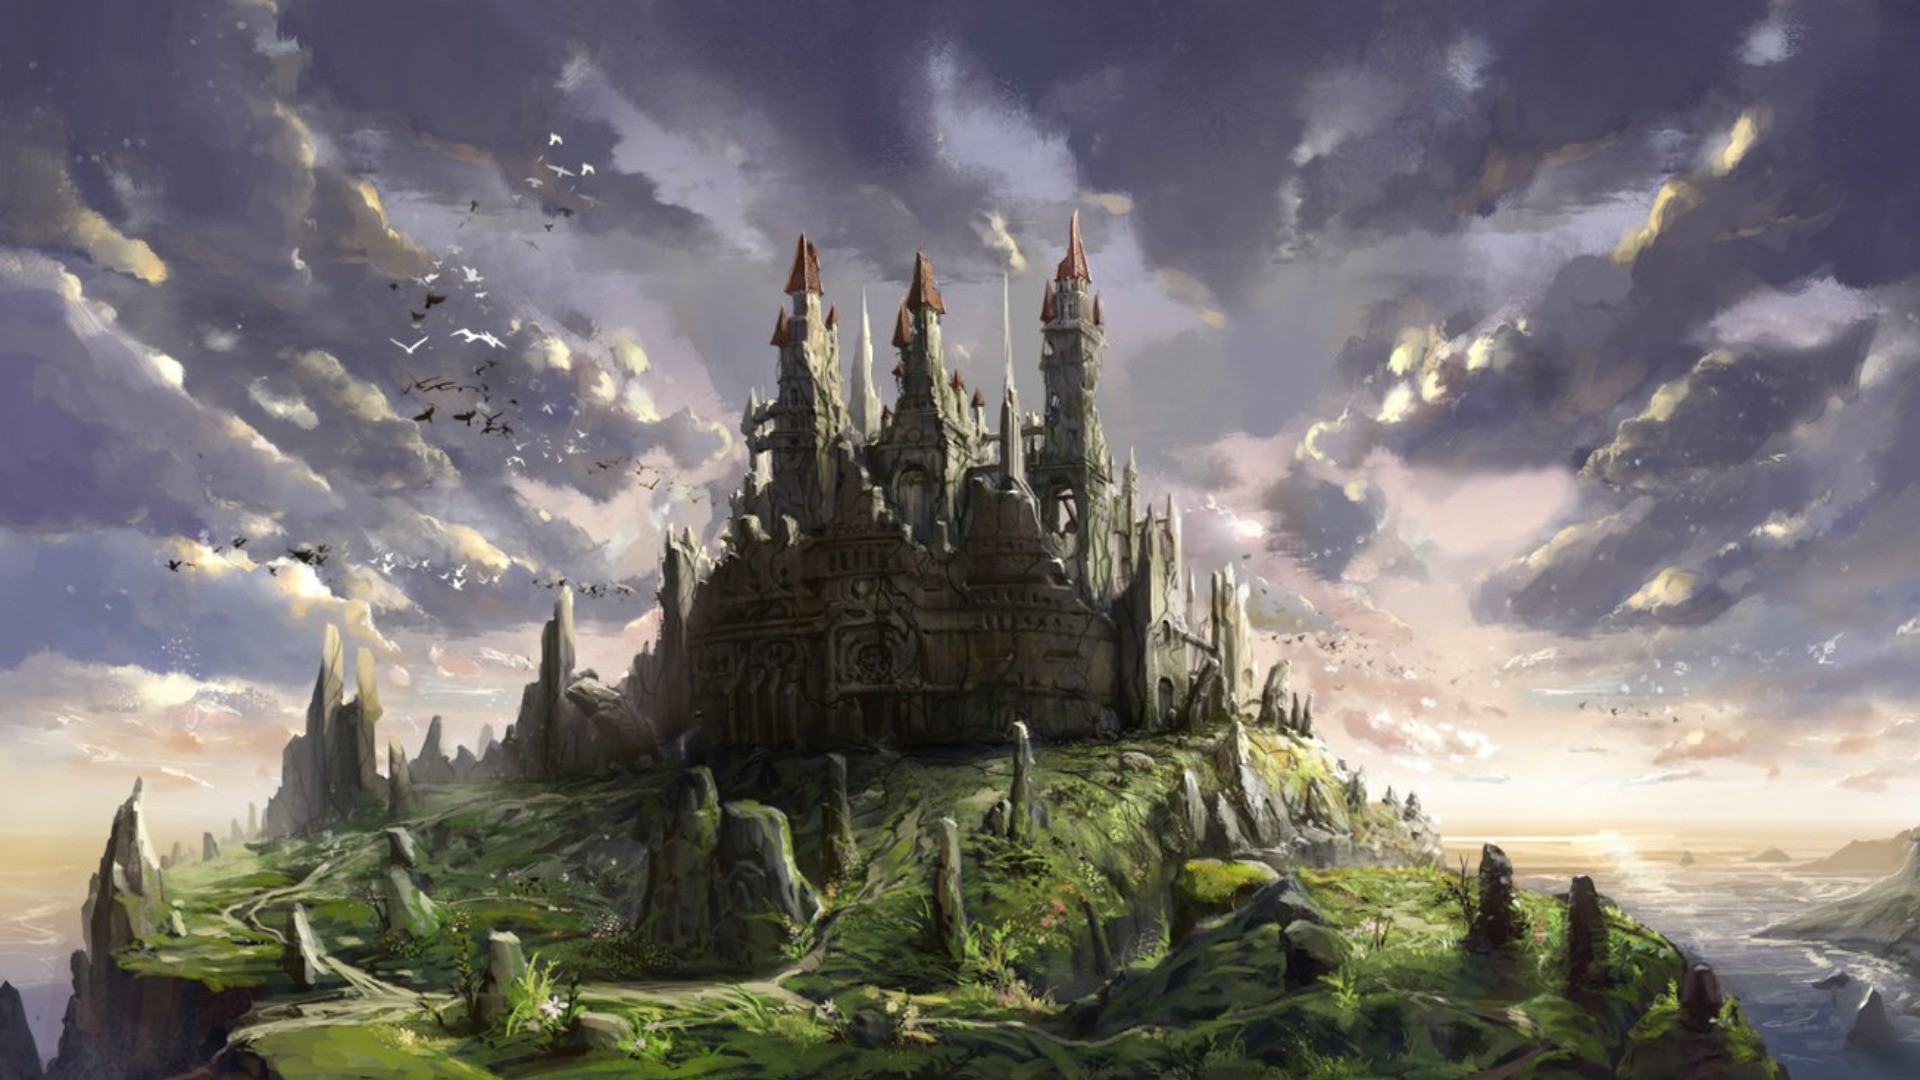 Fantasy Castle Wallpaper Free With Wallpapers Wide Resolution px 418.51 KB